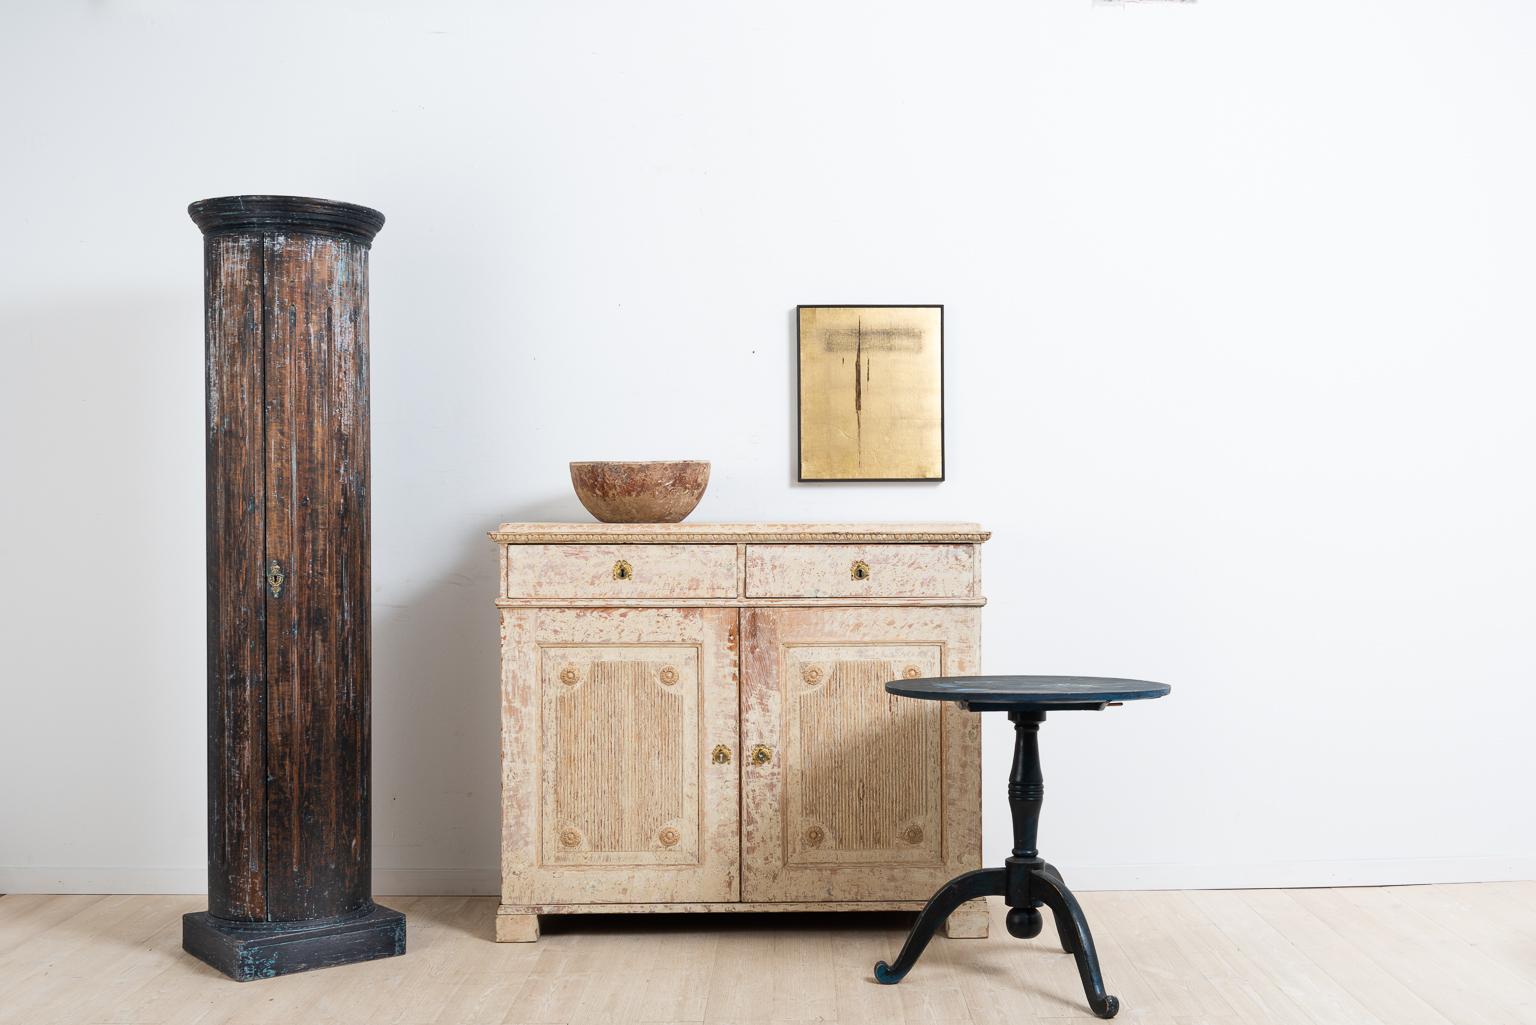 Double doored Gustavian sideboard with dry scarped to original paint. The doors are decorated with panels of fluted decor and carved circles. The lock and key are original and in fully functional condition. Manufactured in the middle of Sweden,